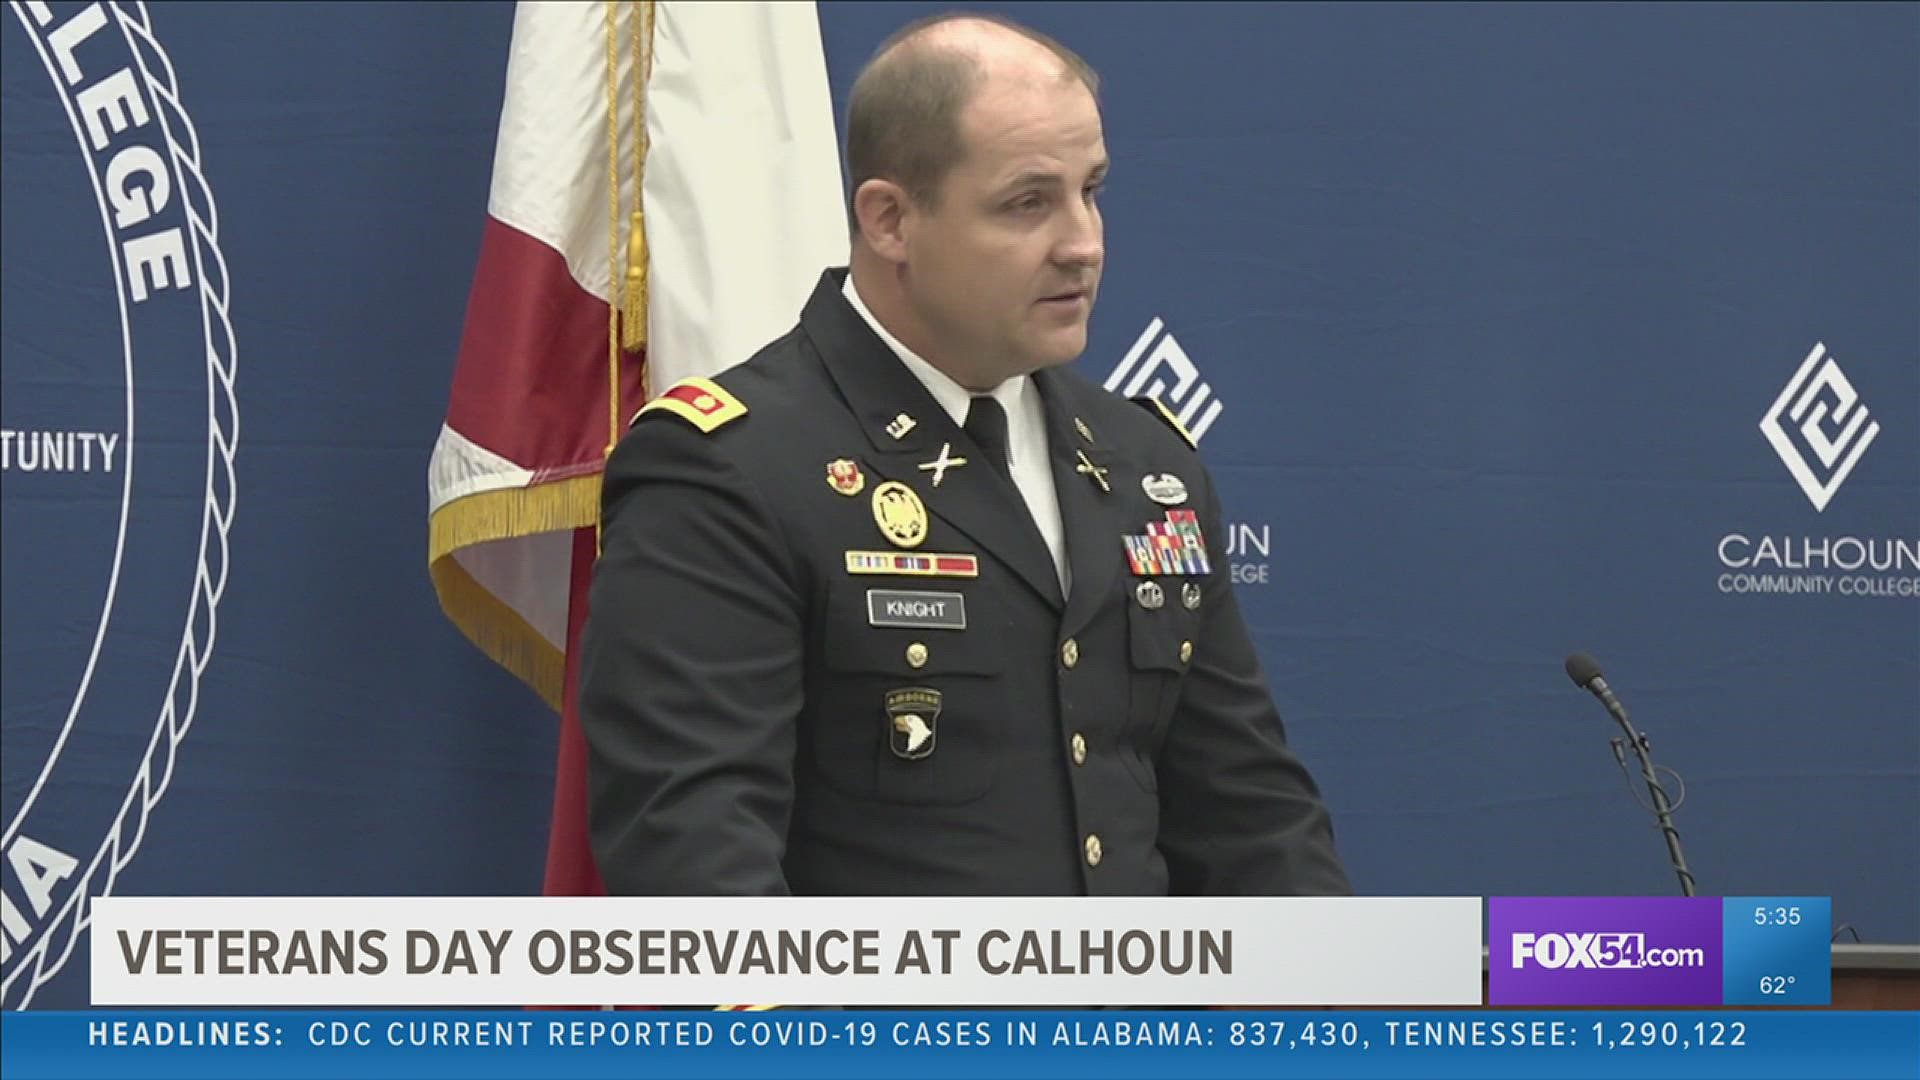 Calhoun wanted students to have a better understanding of the experiences that veterans have to face.